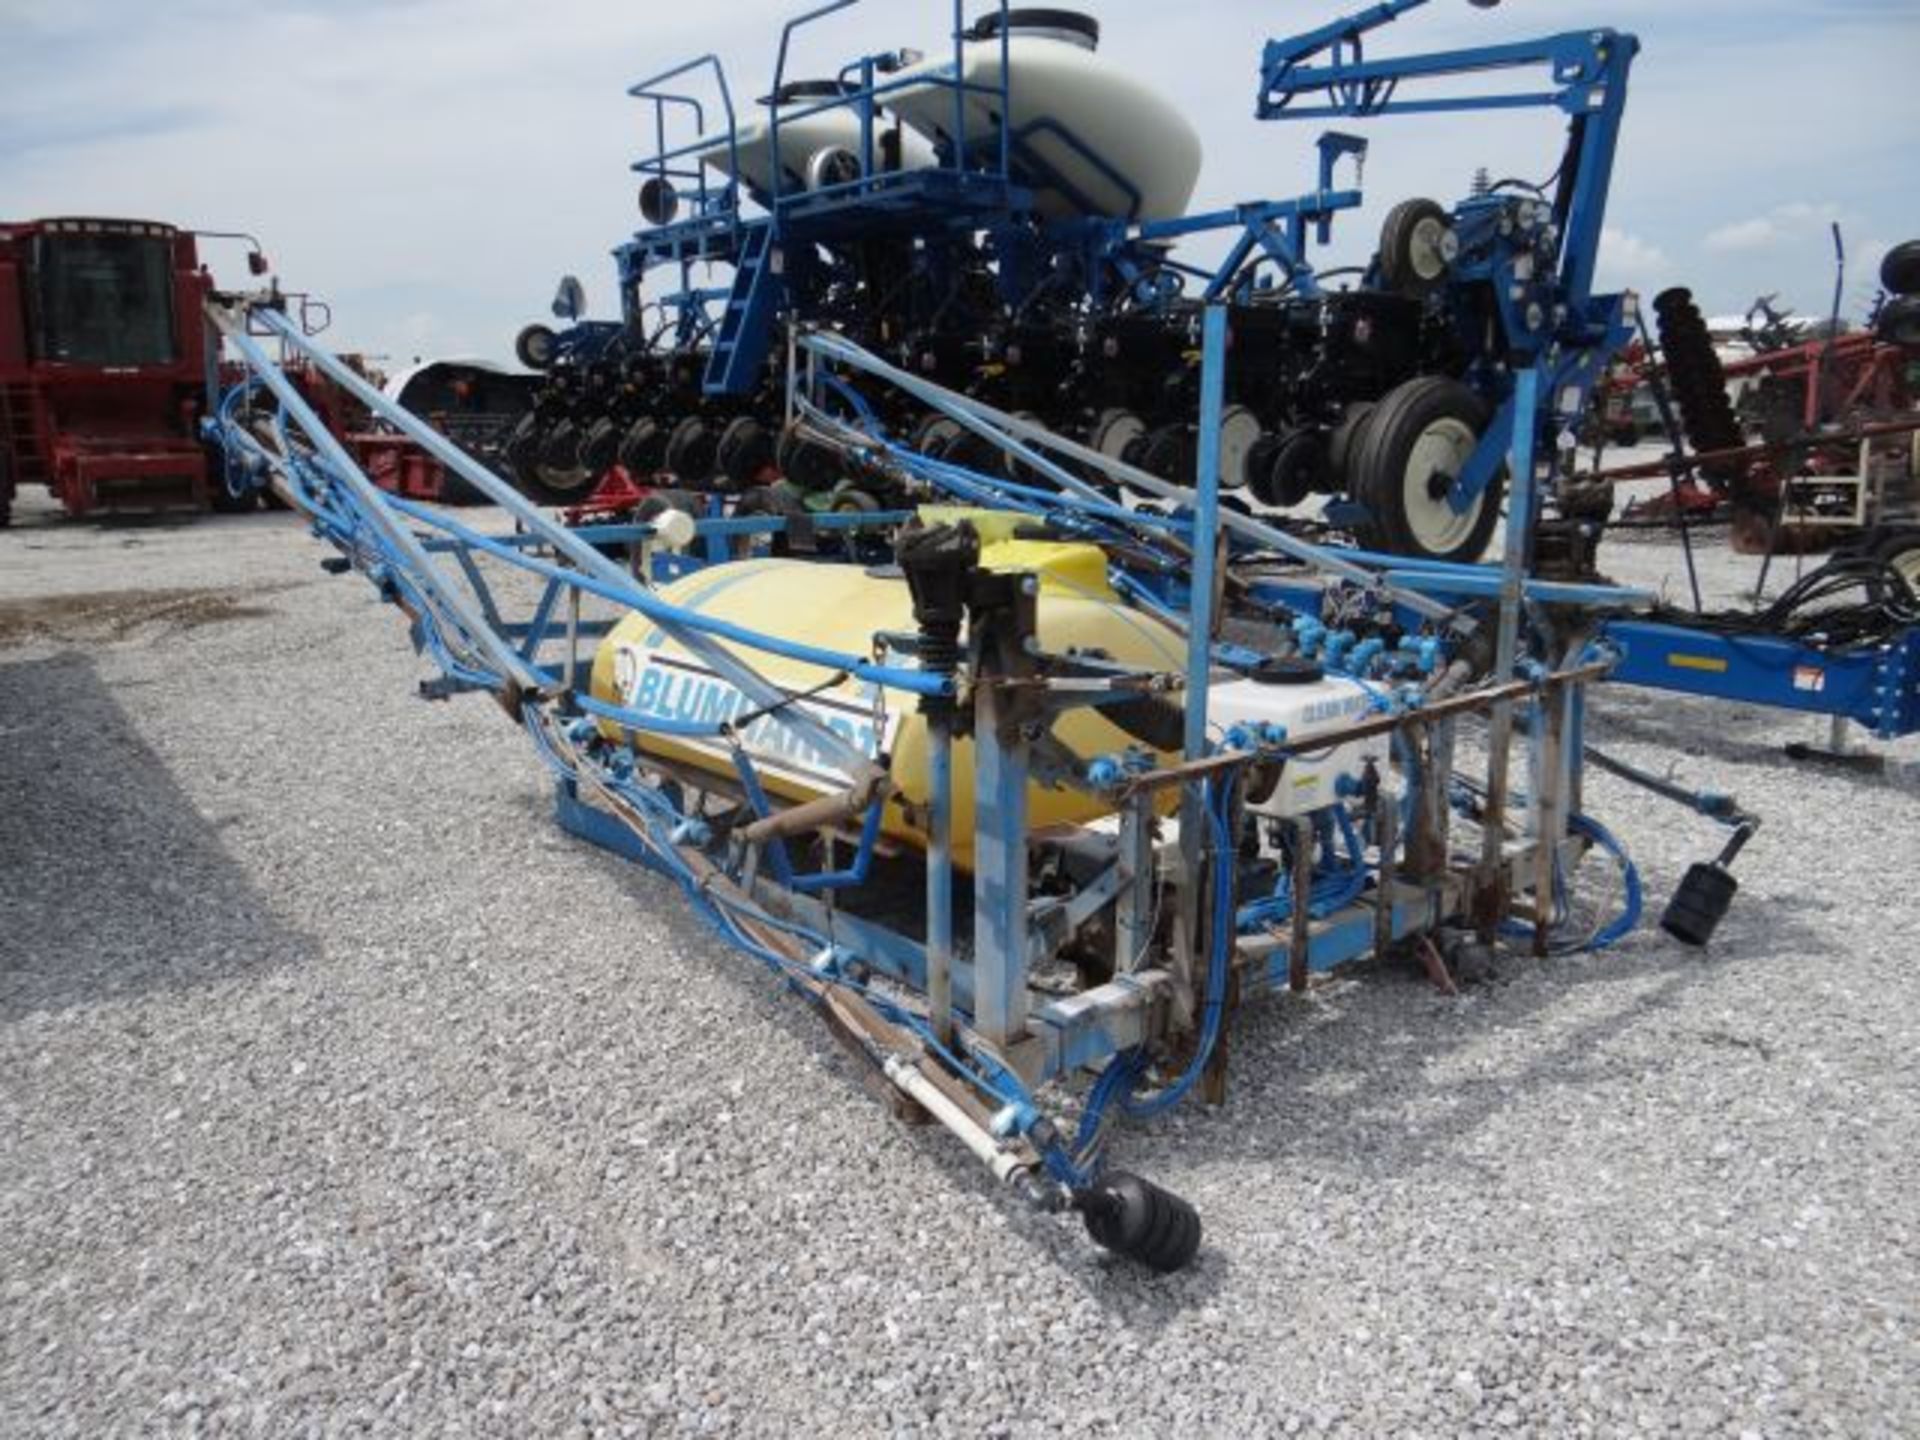 Blumhard Pick-up Sprayer Honda 8hp Motor, Foam Markers, Raven Controller, Manual in the Shed,